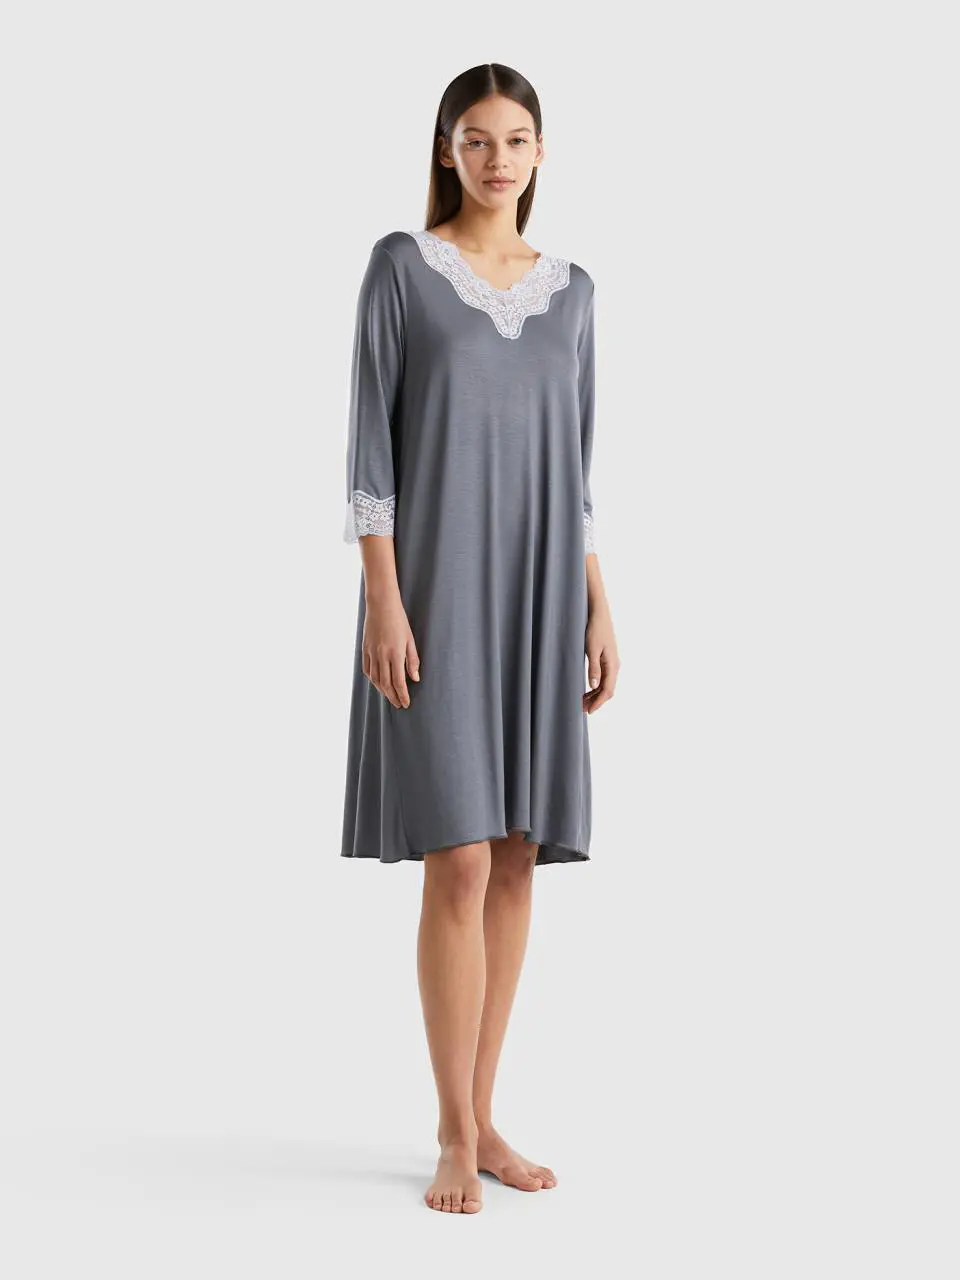 Benetton nightshirt with lace details. 1